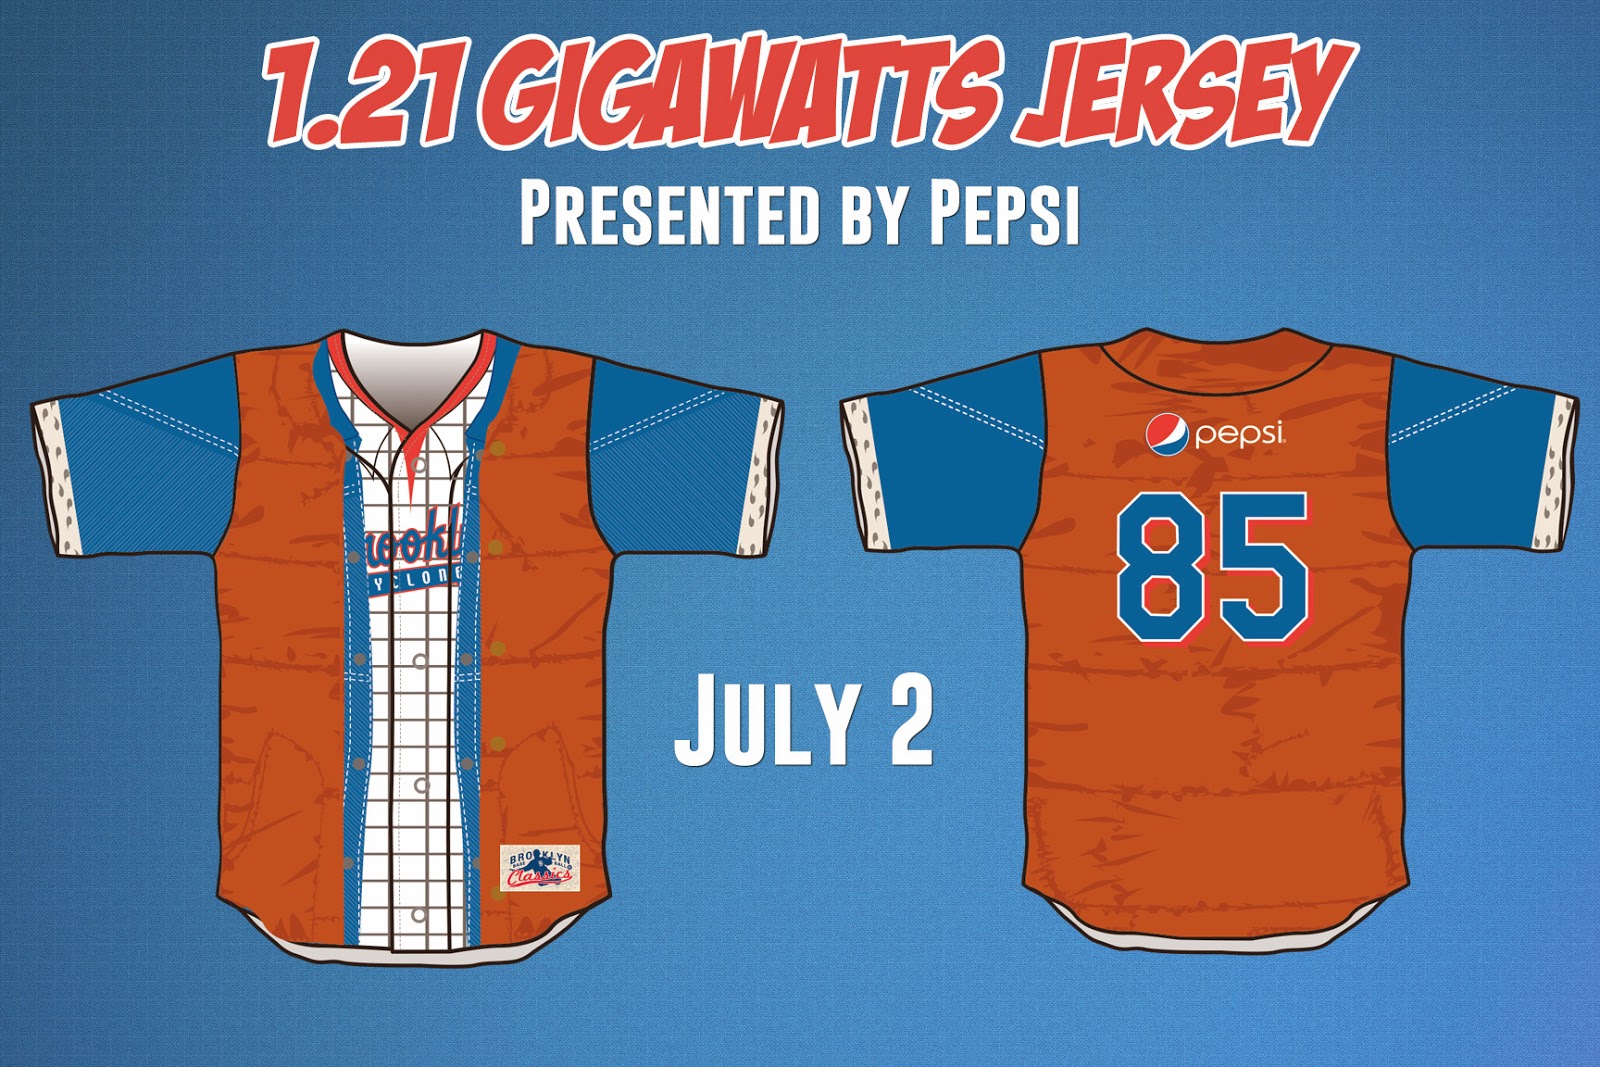 Mack's Mets: Brooklyn Cyclones (SSA) Release 2015 Jersday Thursday